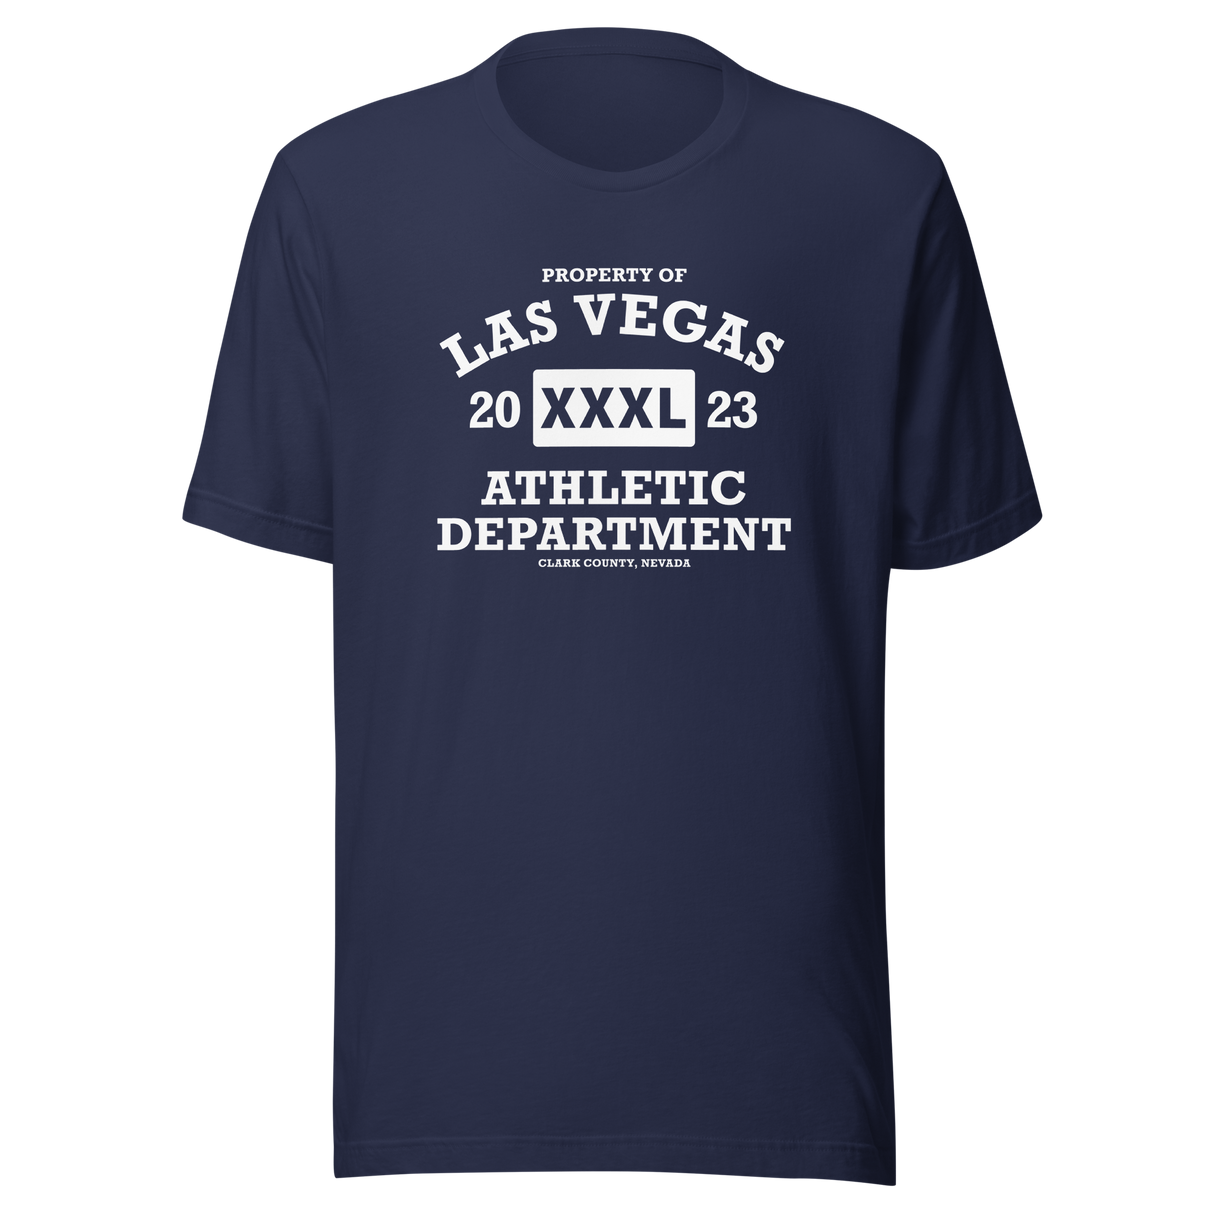 property-of-las-vegas-athletic-department-las-vegas-tee-nevada-t-shirt-fitness-tee-gym-t-shirt-workout-tee#color_navy